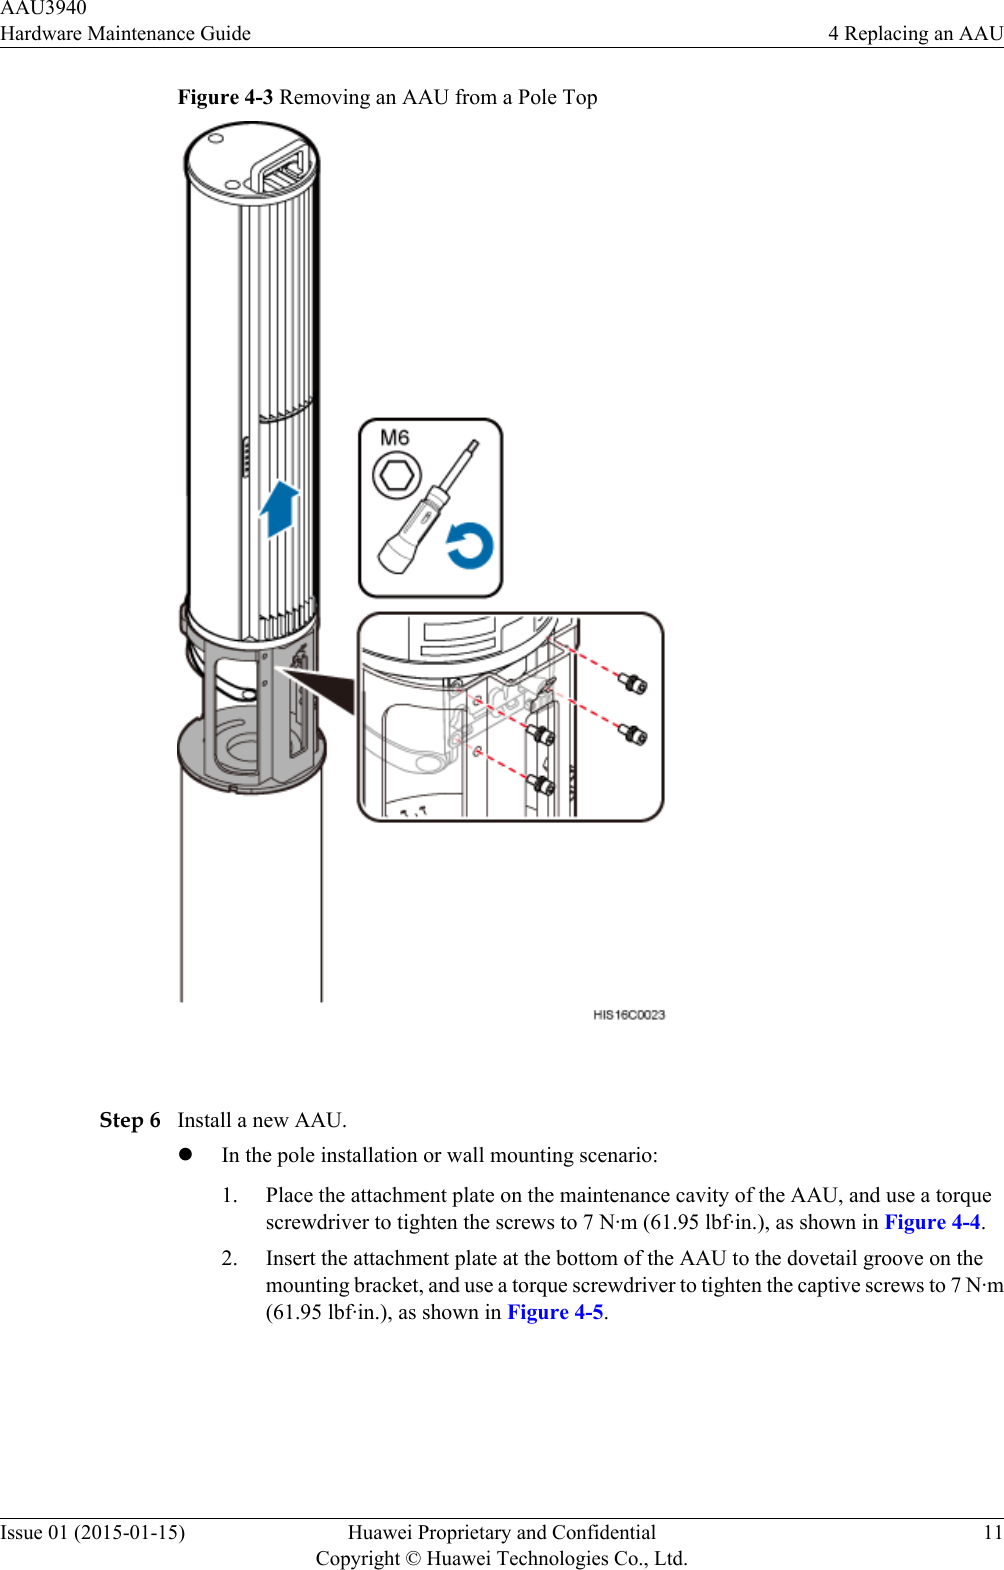 Figure 4-3 Removing an AAU from a Pole Top Step 6 Install a new AAU.lIn the pole installation or wall mounting scenario:1. Place the attachment plate on the maintenance cavity of the AAU, and use a torquescrewdriver to tighten the screws to 7 N·m (61.95 lbf·in.), as shown in Figure 4-4.2. Insert the attachment plate at the bottom of the AAU to the dovetail groove on themounting bracket, and use a torque screwdriver to tighten the captive screws to 7 N·m(61.95 lbf·in.), as shown in Figure 4-5.AAU3940Hardware Maintenance Guide 4 Replacing an AAUIssue 01 (2015-01-15) Huawei Proprietary and ConfidentialCopyright © Huawei Technologies Co., Ltd.11